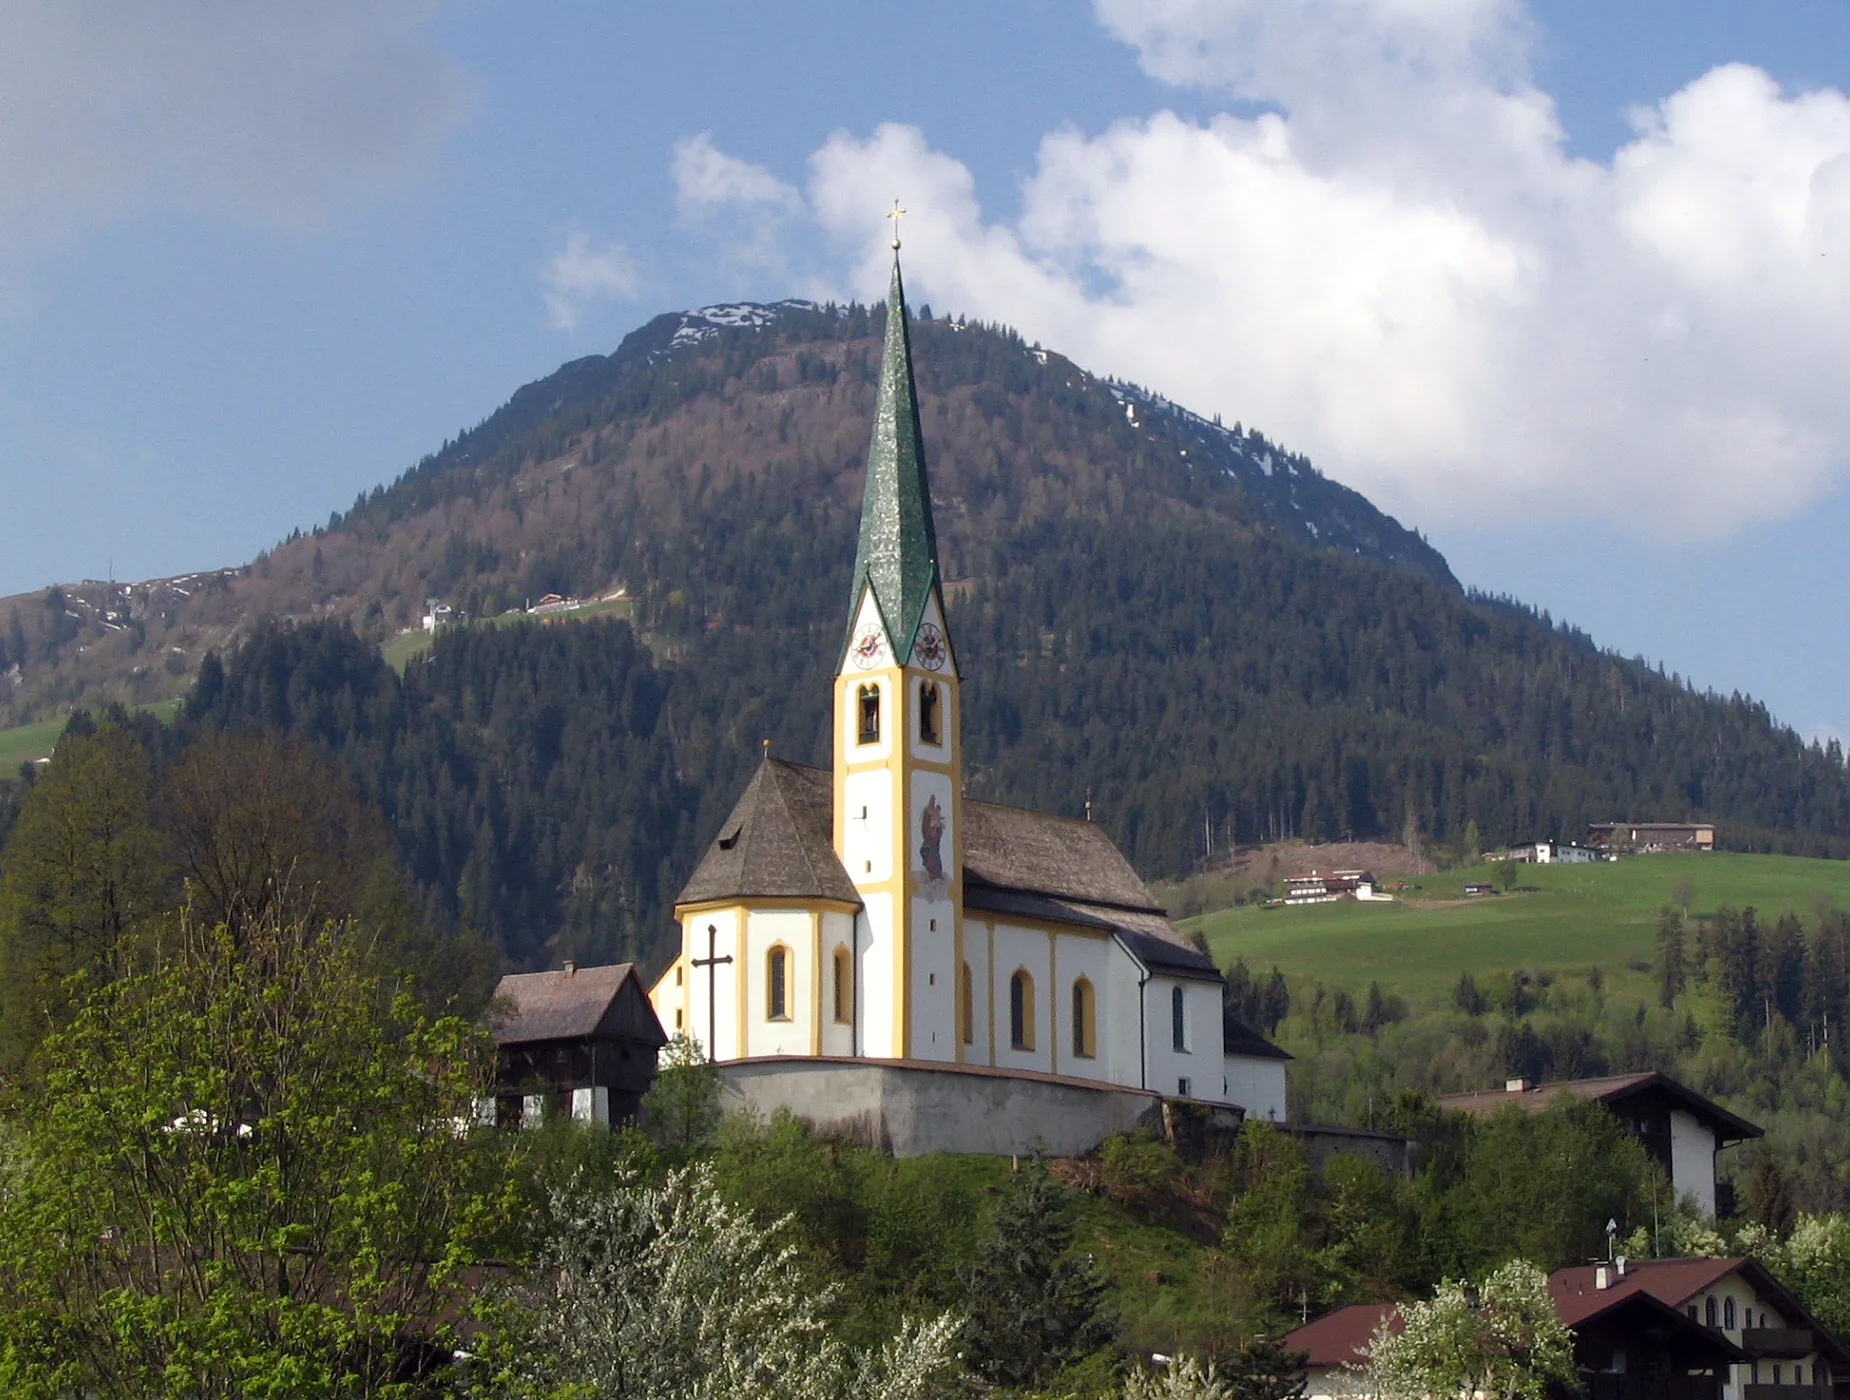 Photo showing: The church in Kirchberg, Tyrol, Austria. In the background the Gaisberg mountain.